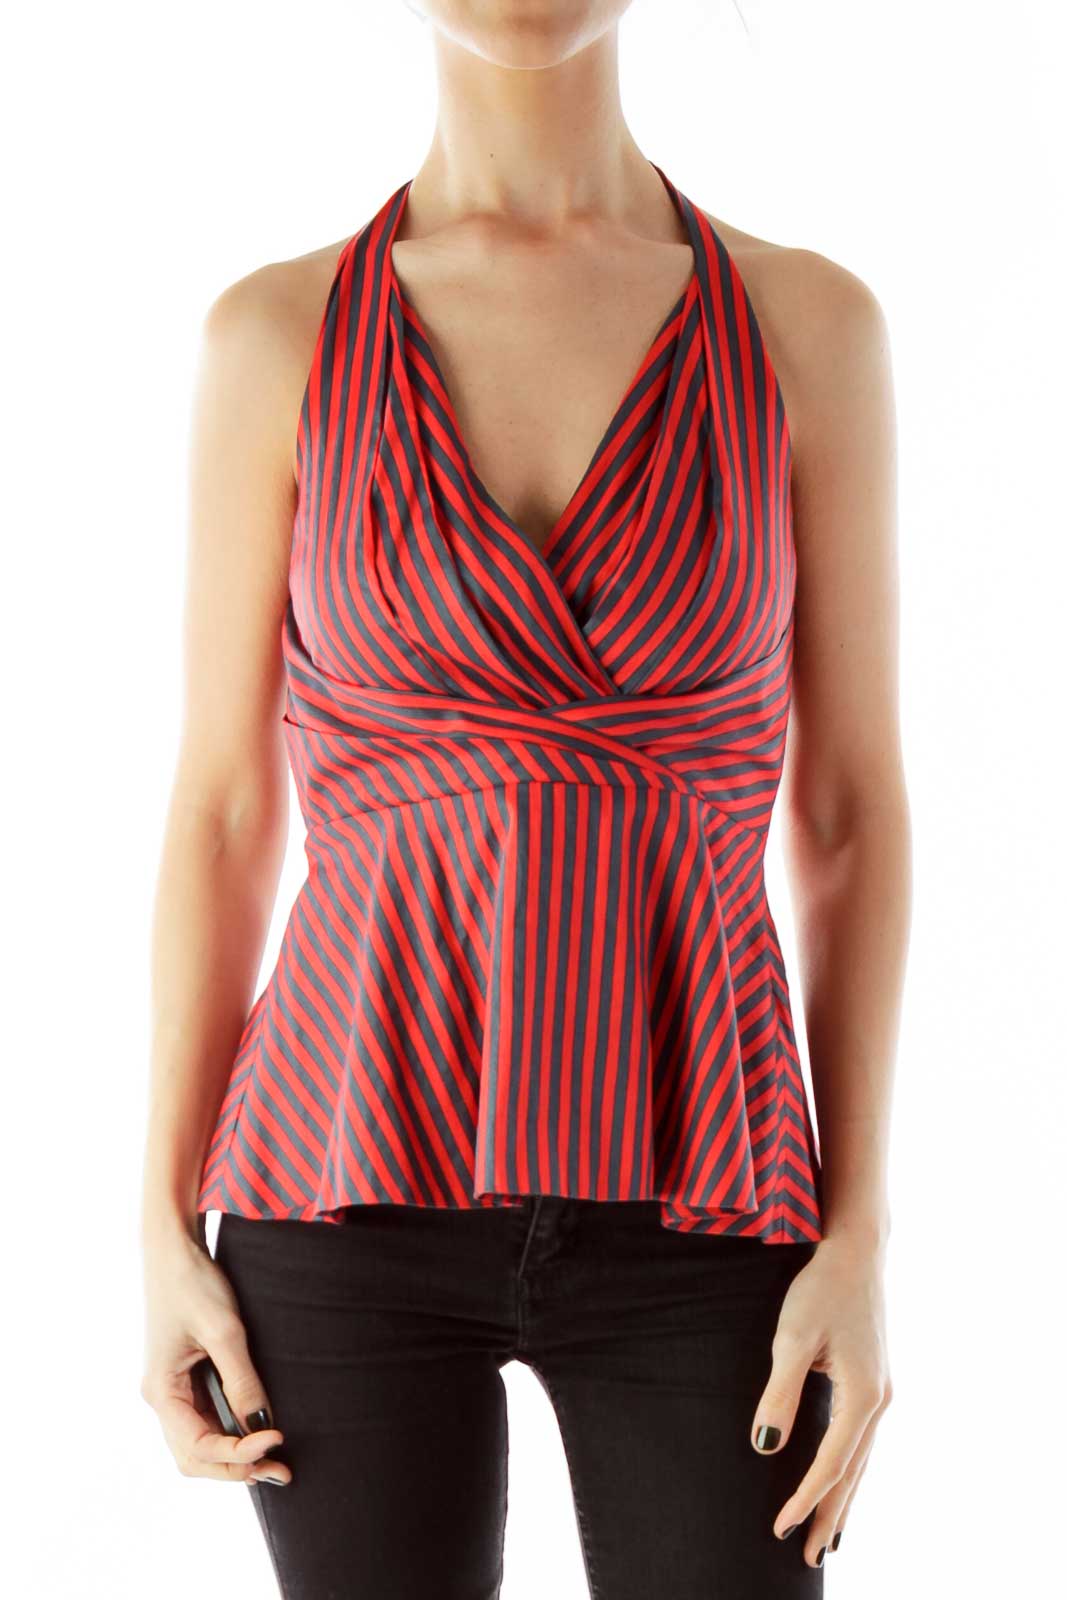 Black Red Stripped Halter Top Front